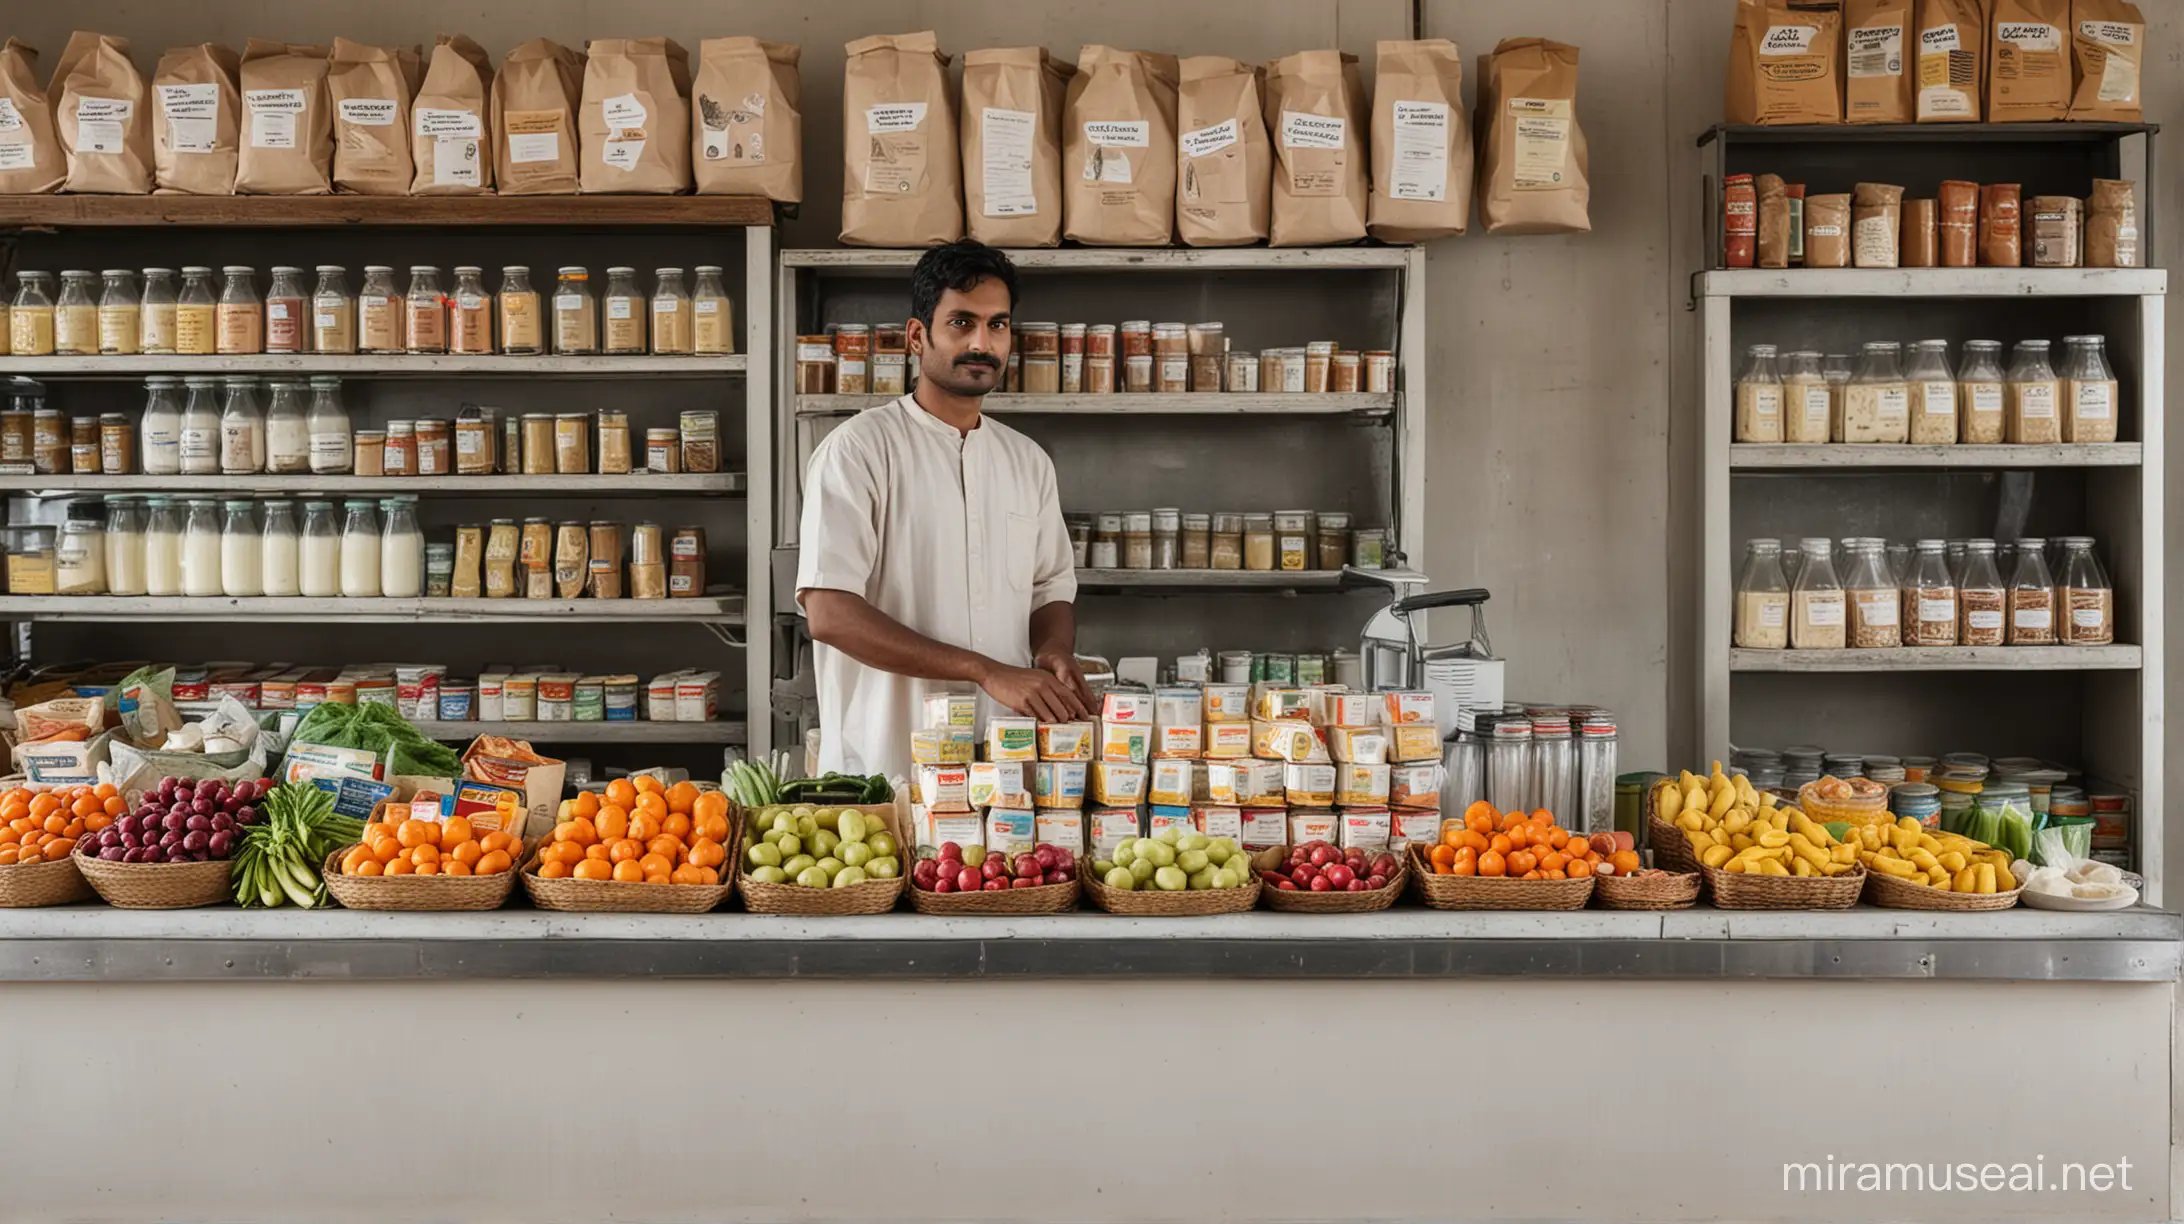 A tiny modern minimal retail milk store in a indian urban setting that only sells milk packets, curd packets and ghee along with fresh vegetables and fruits with a Indian shopkeeper standing over the counter